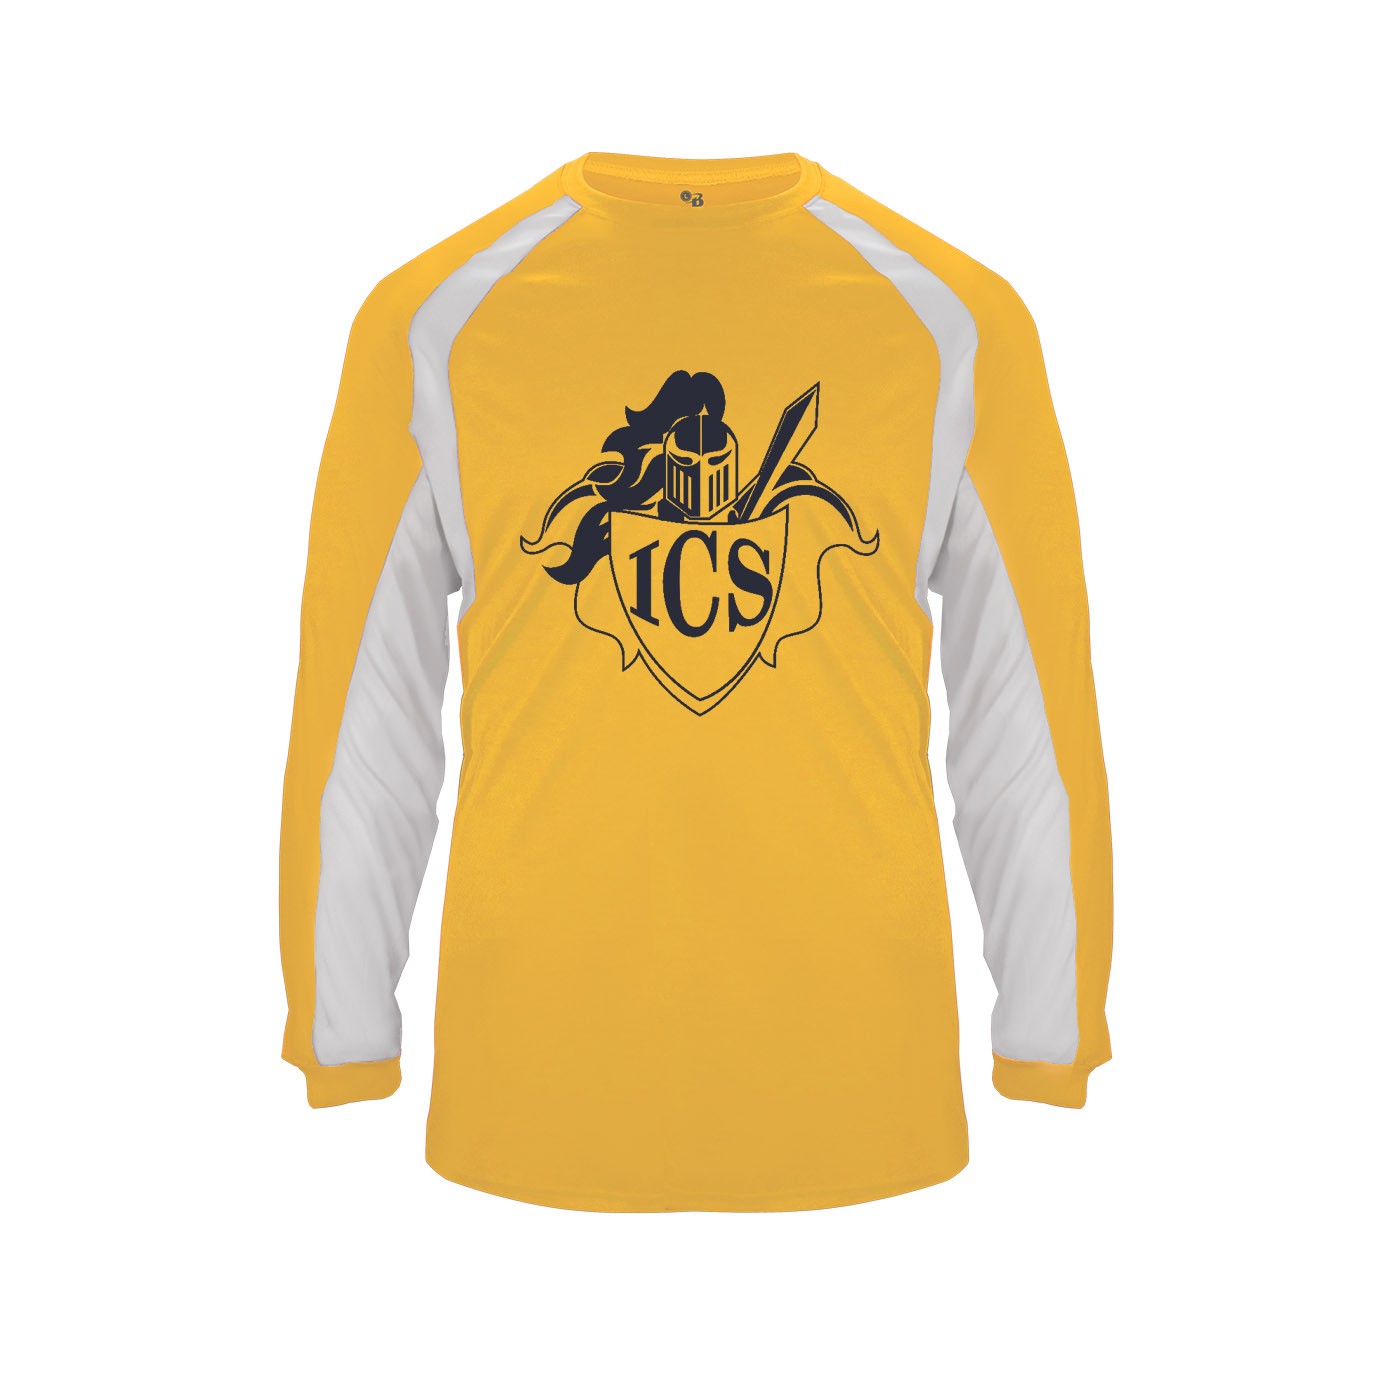 ICS Staff Hook L/S T-Shirt w/ Navy Logo #F11-F12- Please Allow 3-4 Weeks for Delivery